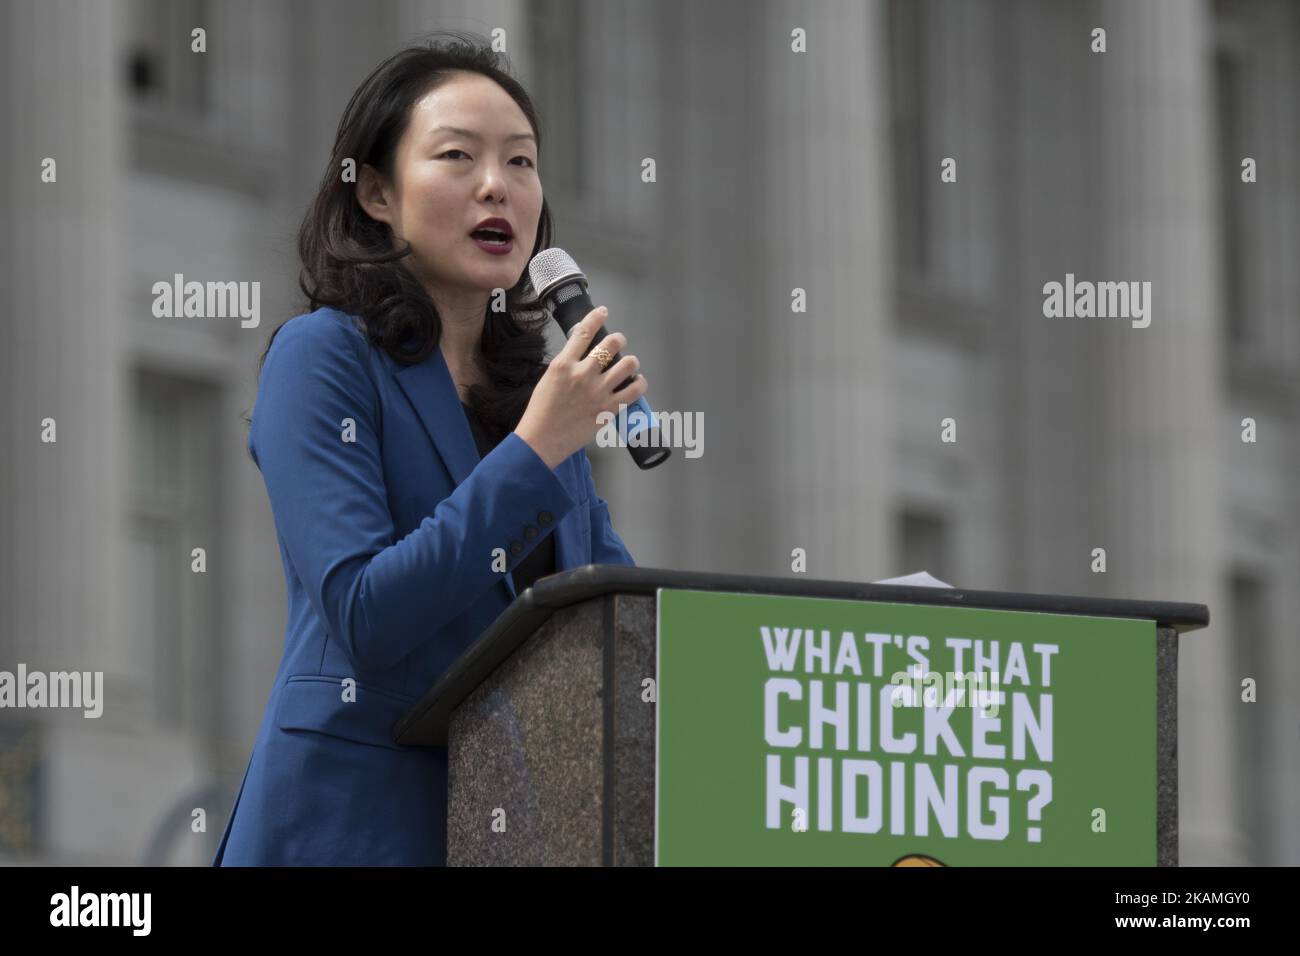 San Francisco Supervisor Jane Kim speaks during Tax March in San Francisco, California on April 15, 2017. The march features 30-foot tall inflatable Trump Chicken that resembles President Donald Trump in front of San Francisco City Hall. (Photo by Yichuan Cao/NurPhoto) *** Please Use Credit from Credit Field *** Stock Photo